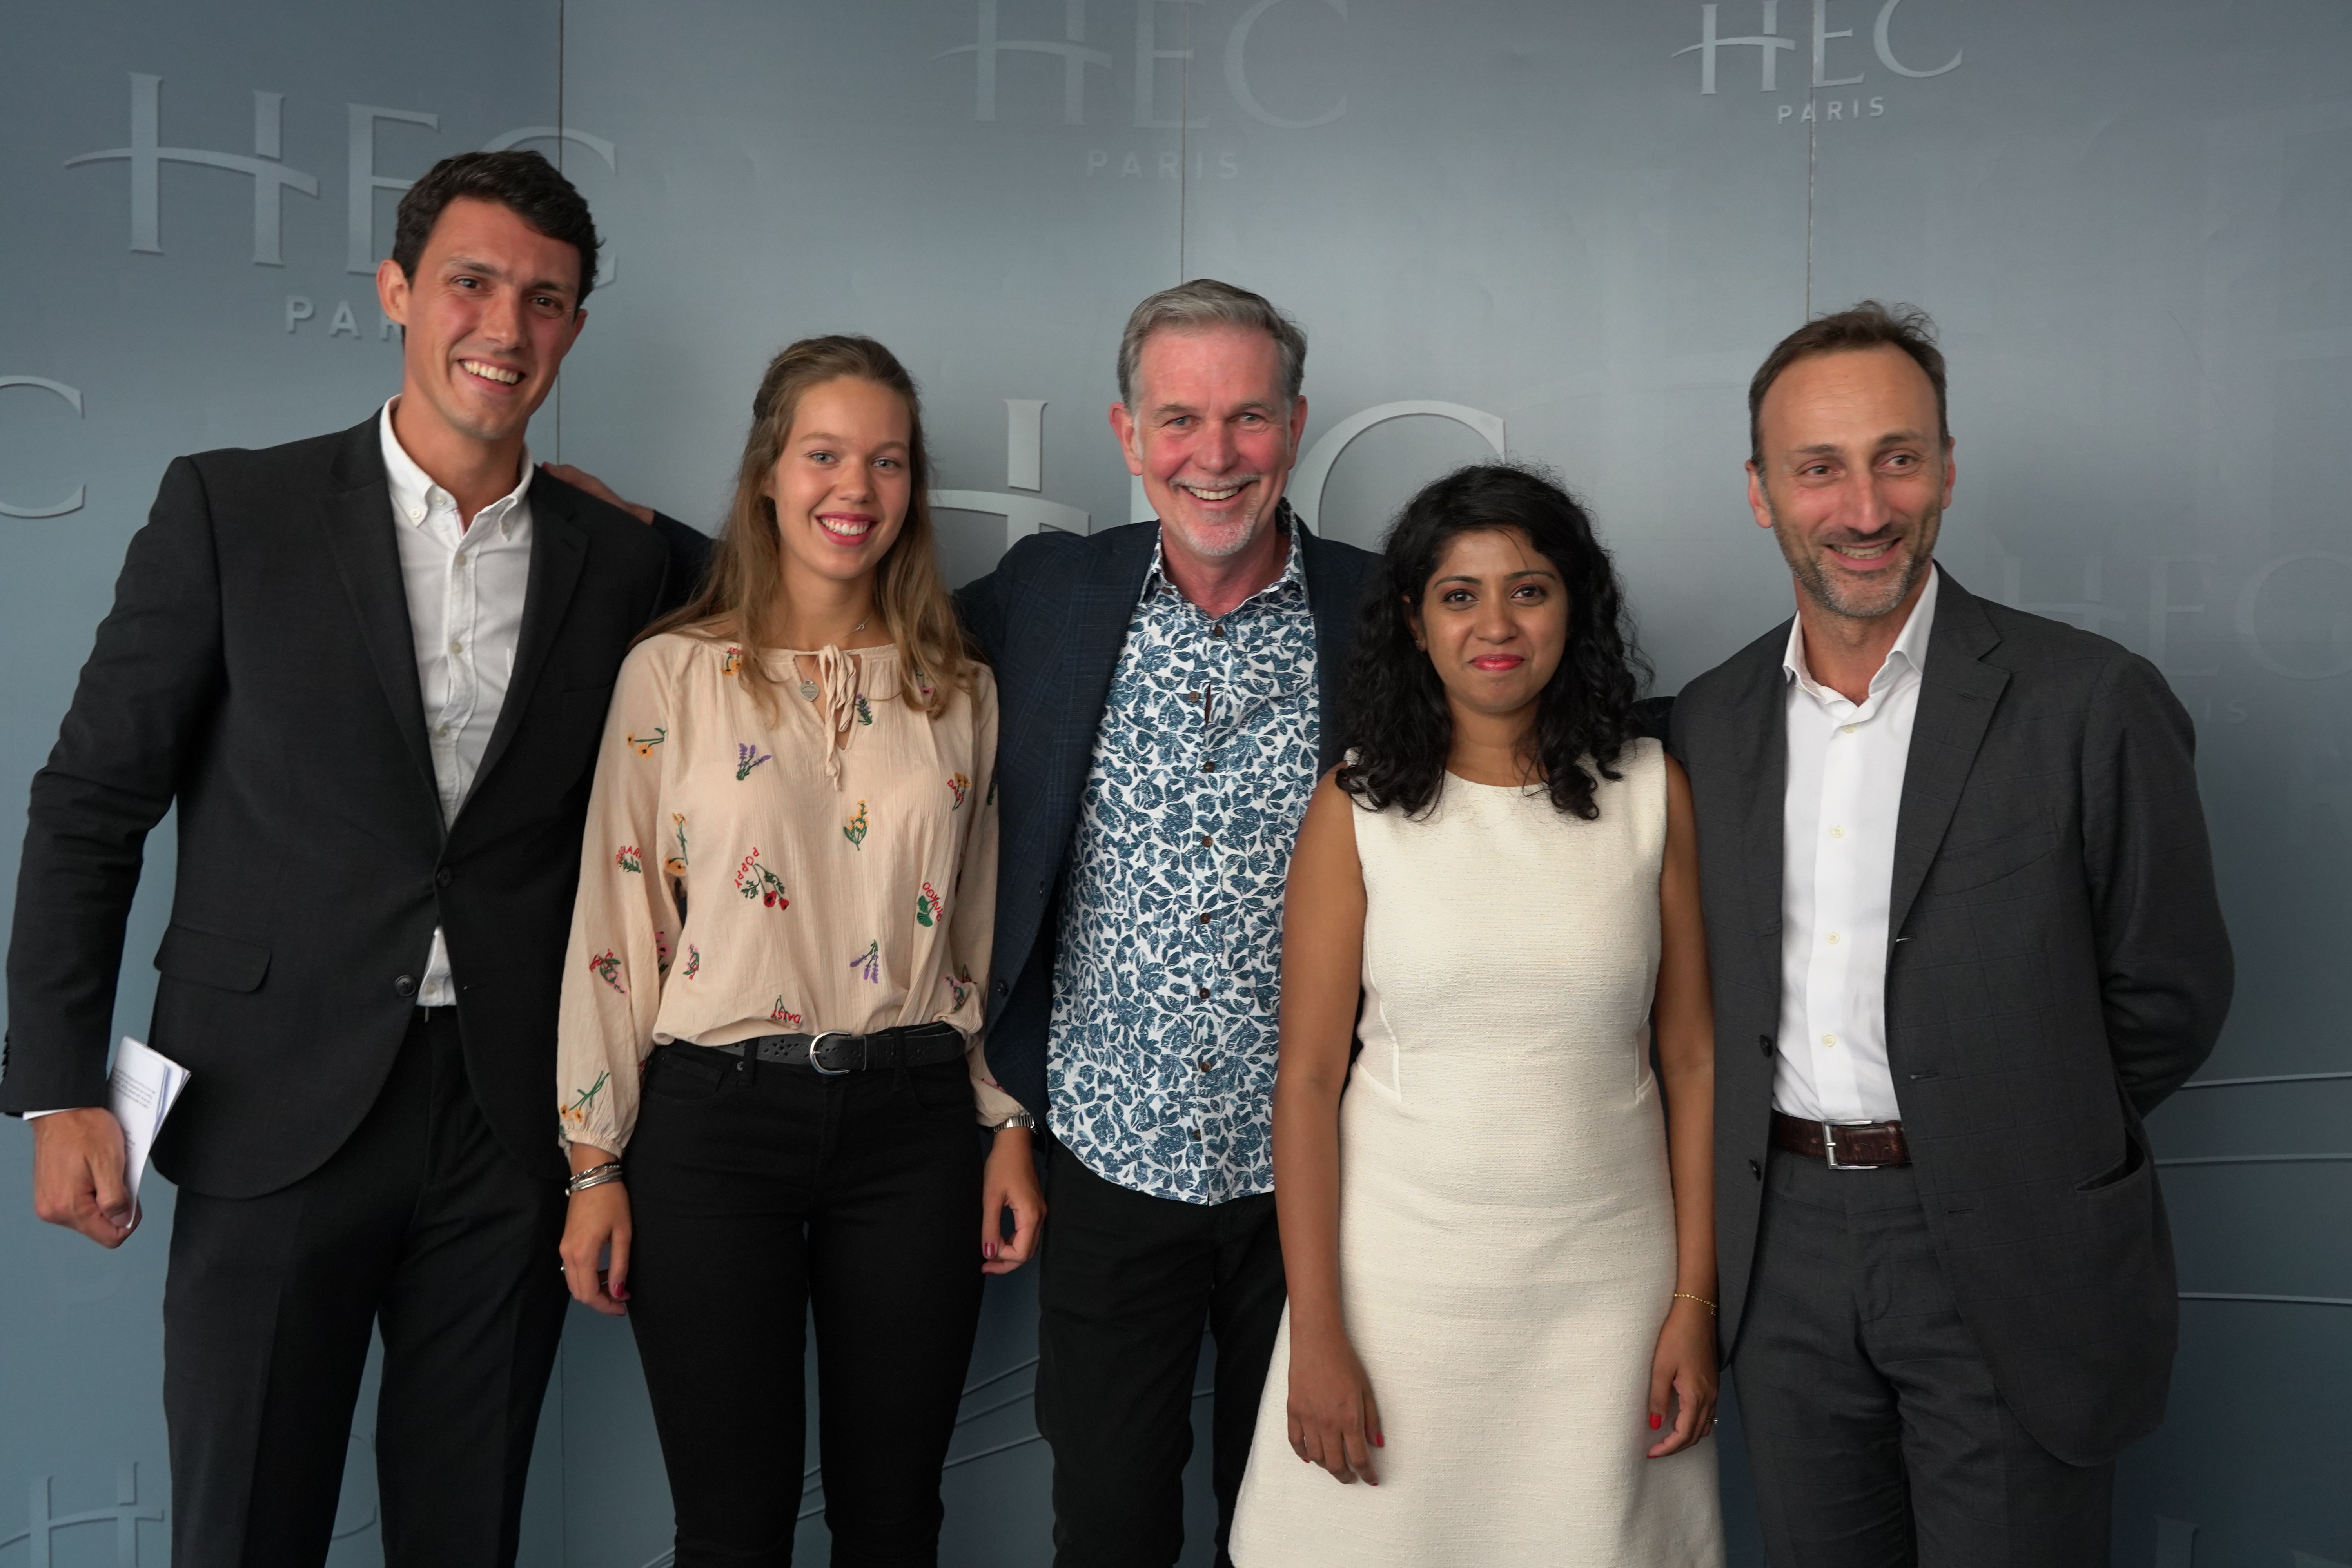 HEC Paris students with Netfix CEO Reed Hastings and Associate Dean Andrea Masini